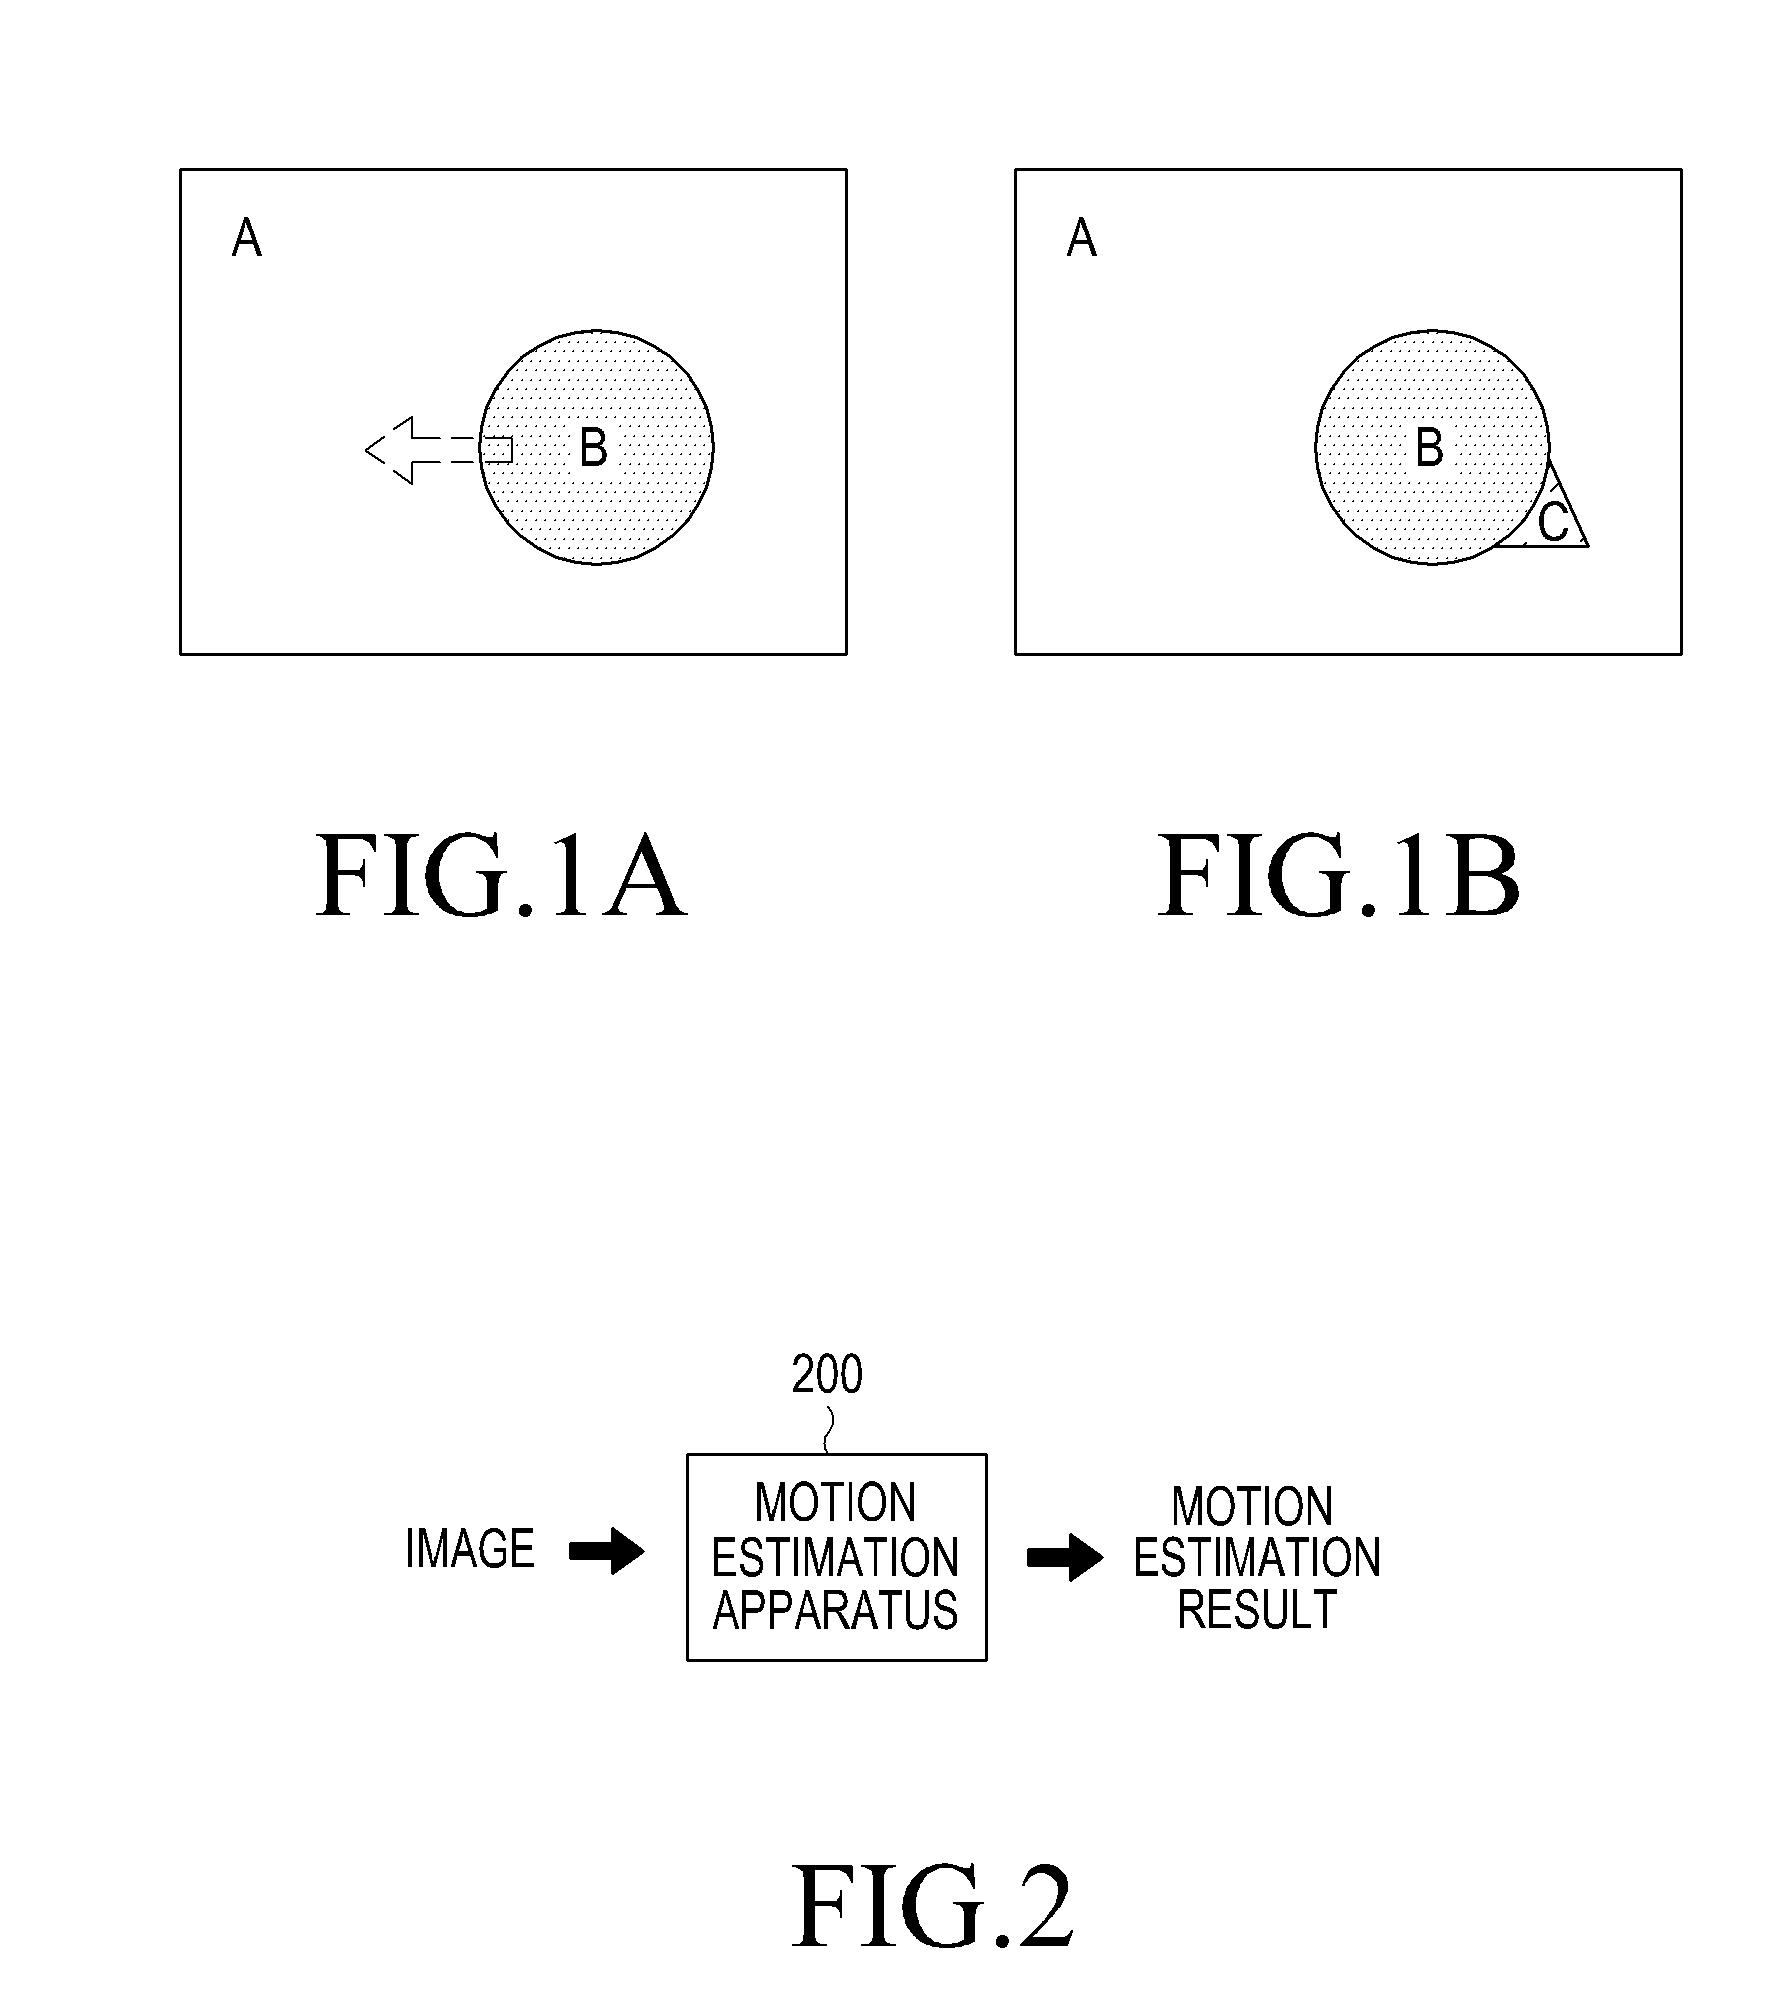 Apparatus and method for motion estimation in an image processing system